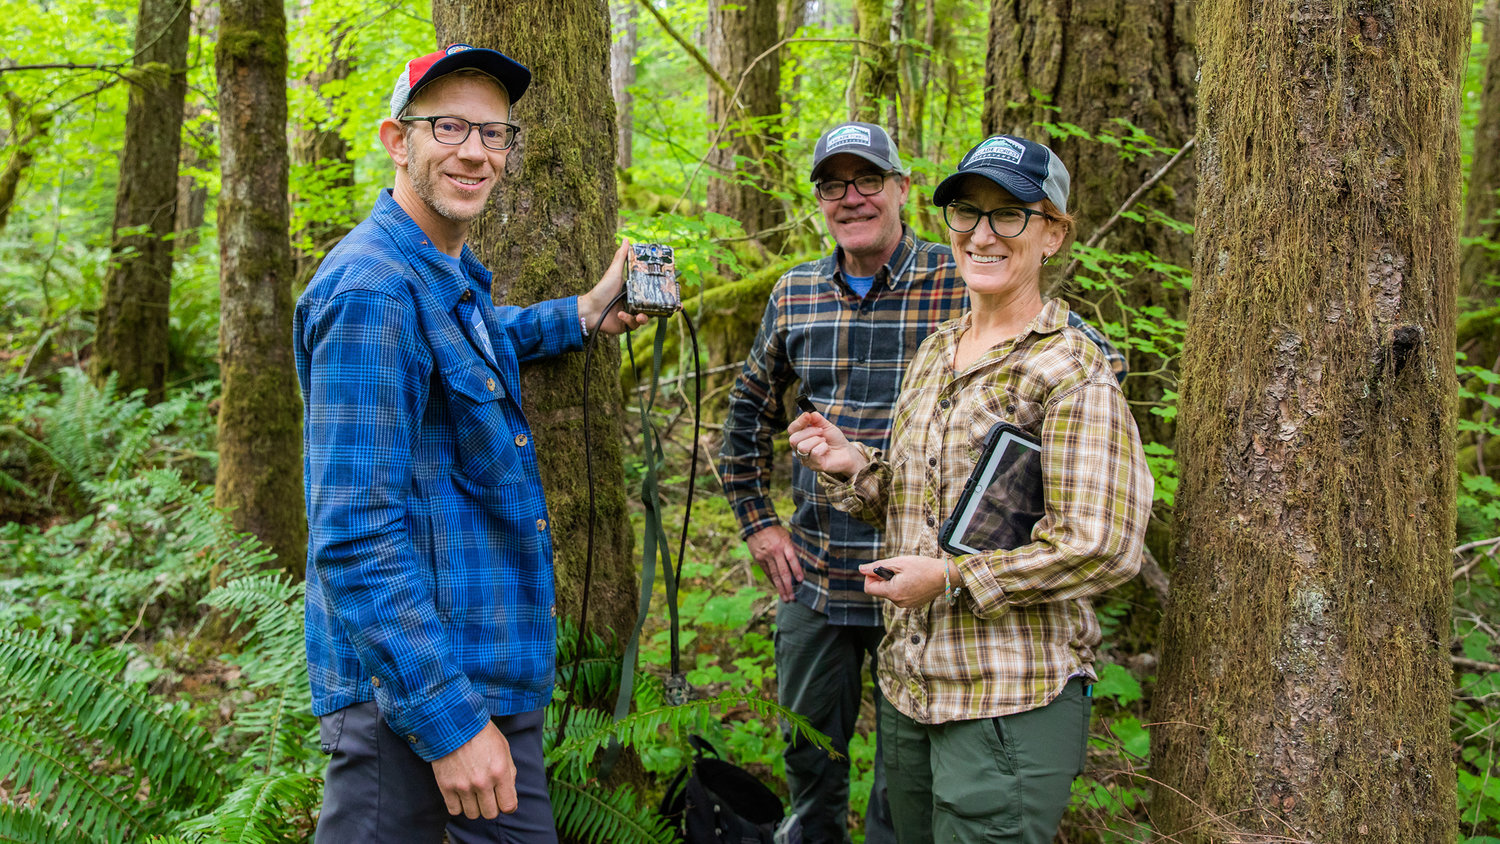 From left, Brian Yellin, Jeff Green and Kim Freeman, all of Portland, smile for a photo with a game camera retrieved from the Gifford Pinchot National Forest in Lewis County Saturday morning.